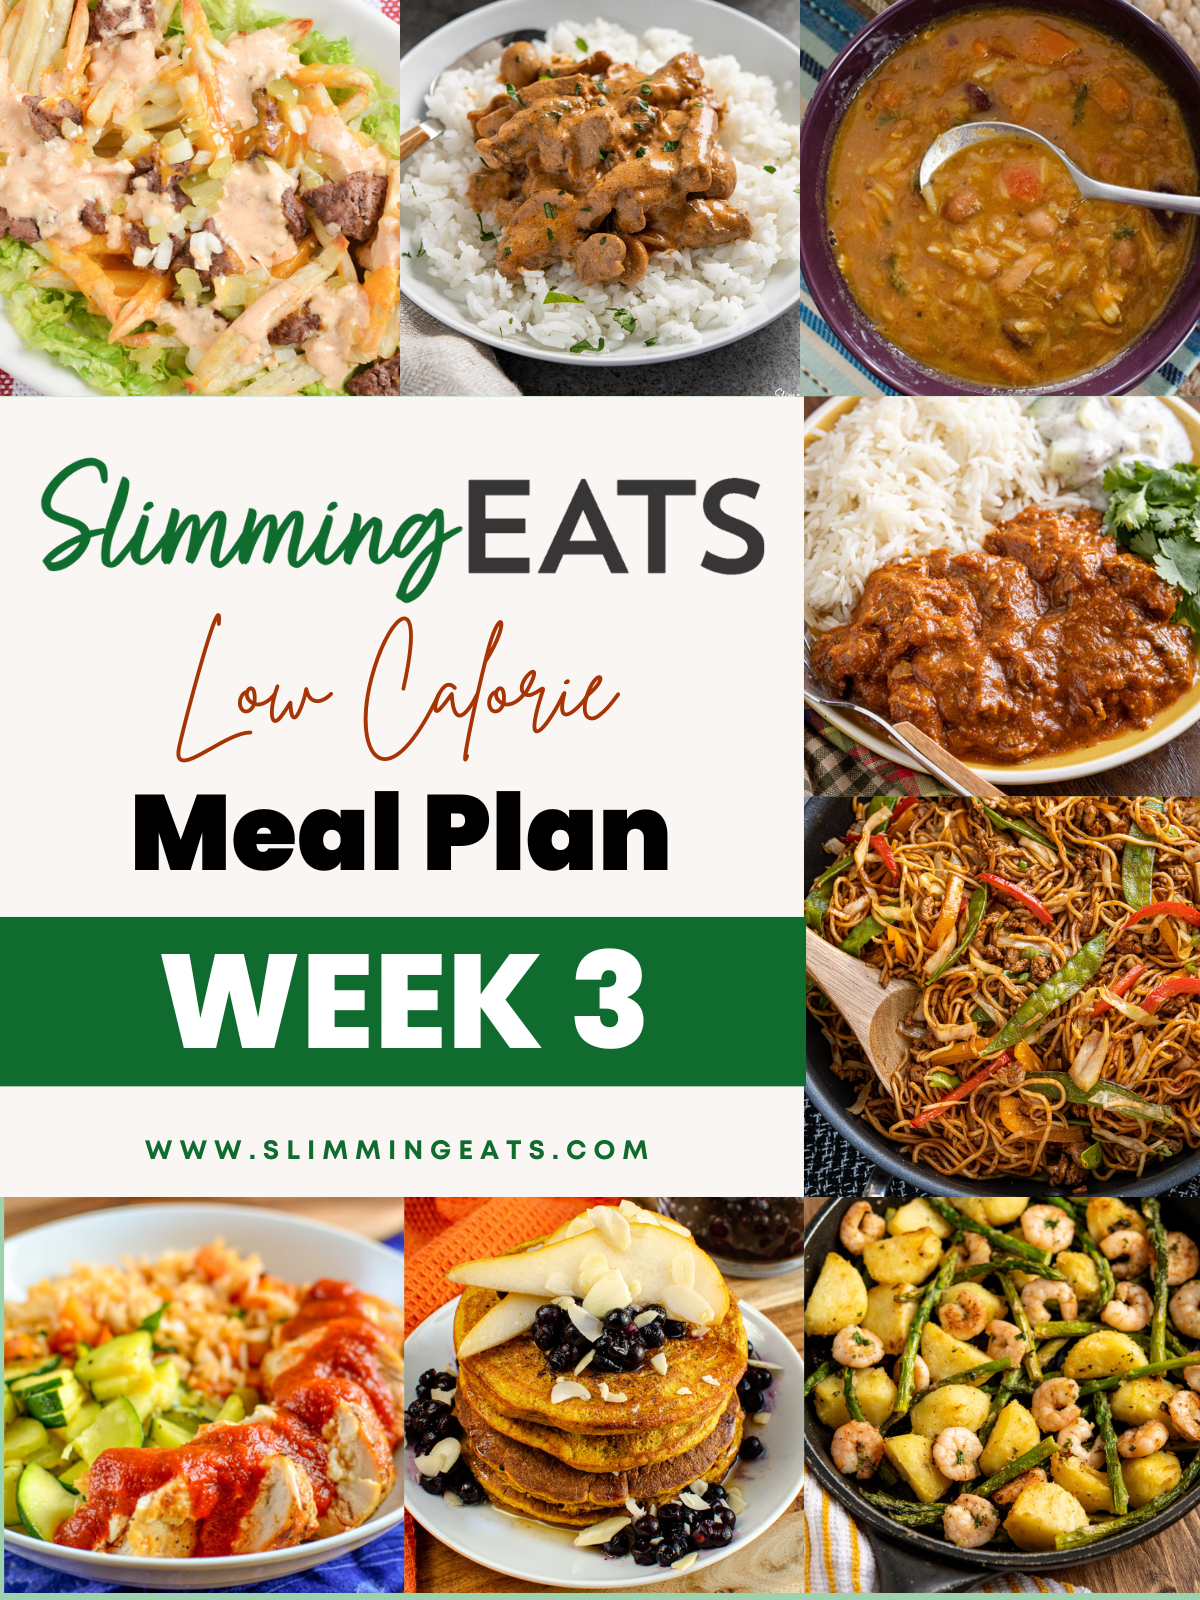 slimming eats meal plan week 3 featured images